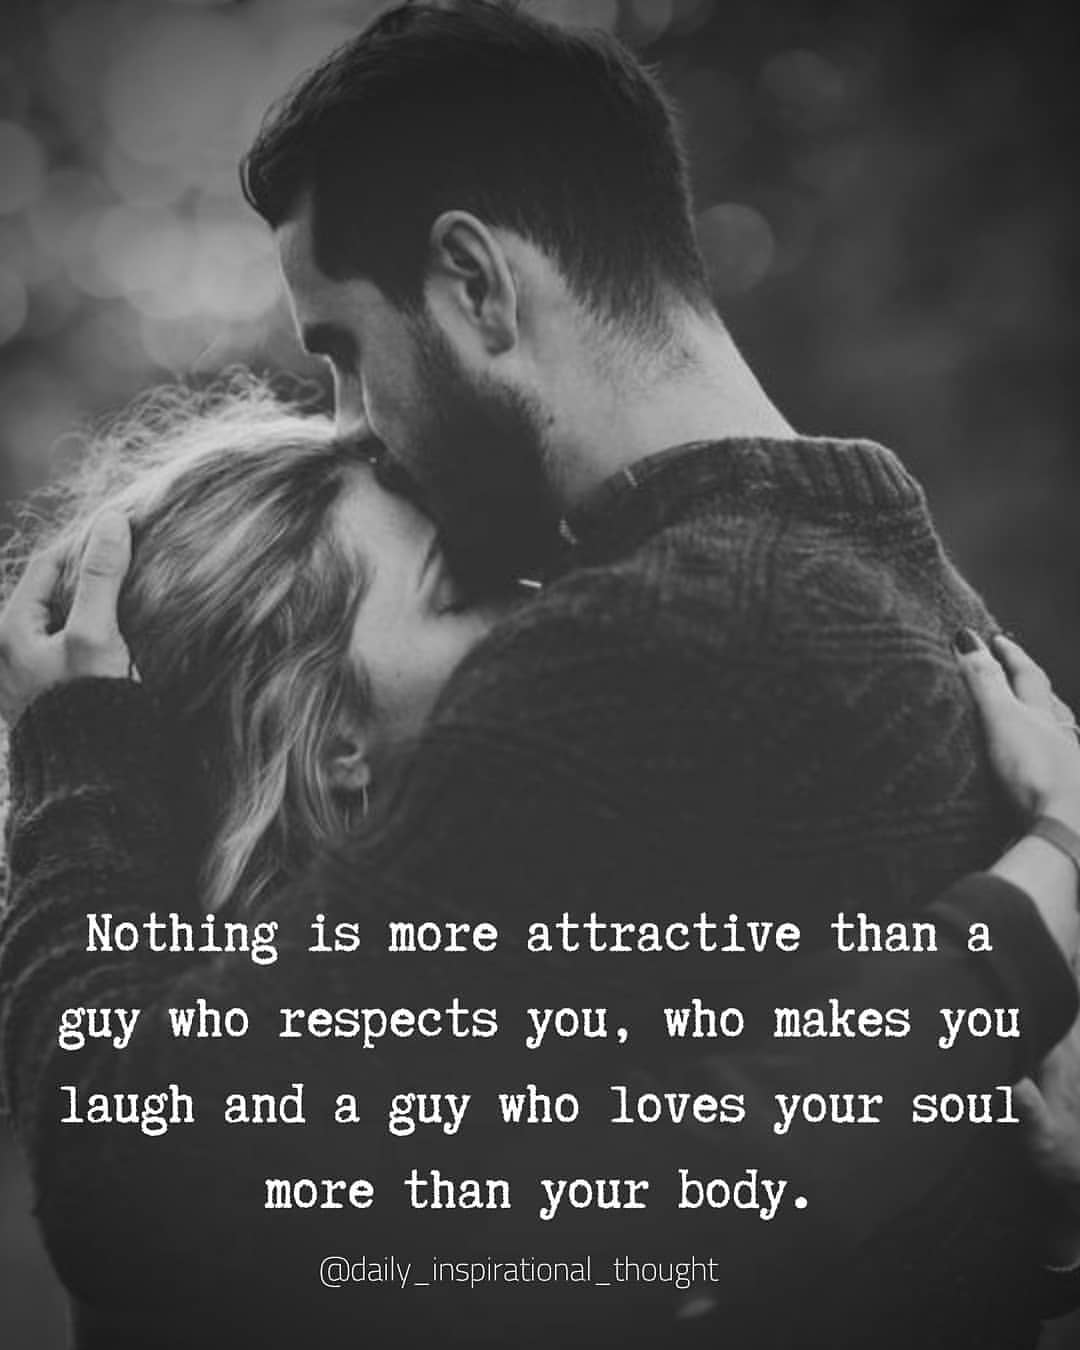 Nothing is more attractive than a guy who respects you, who makes you ...